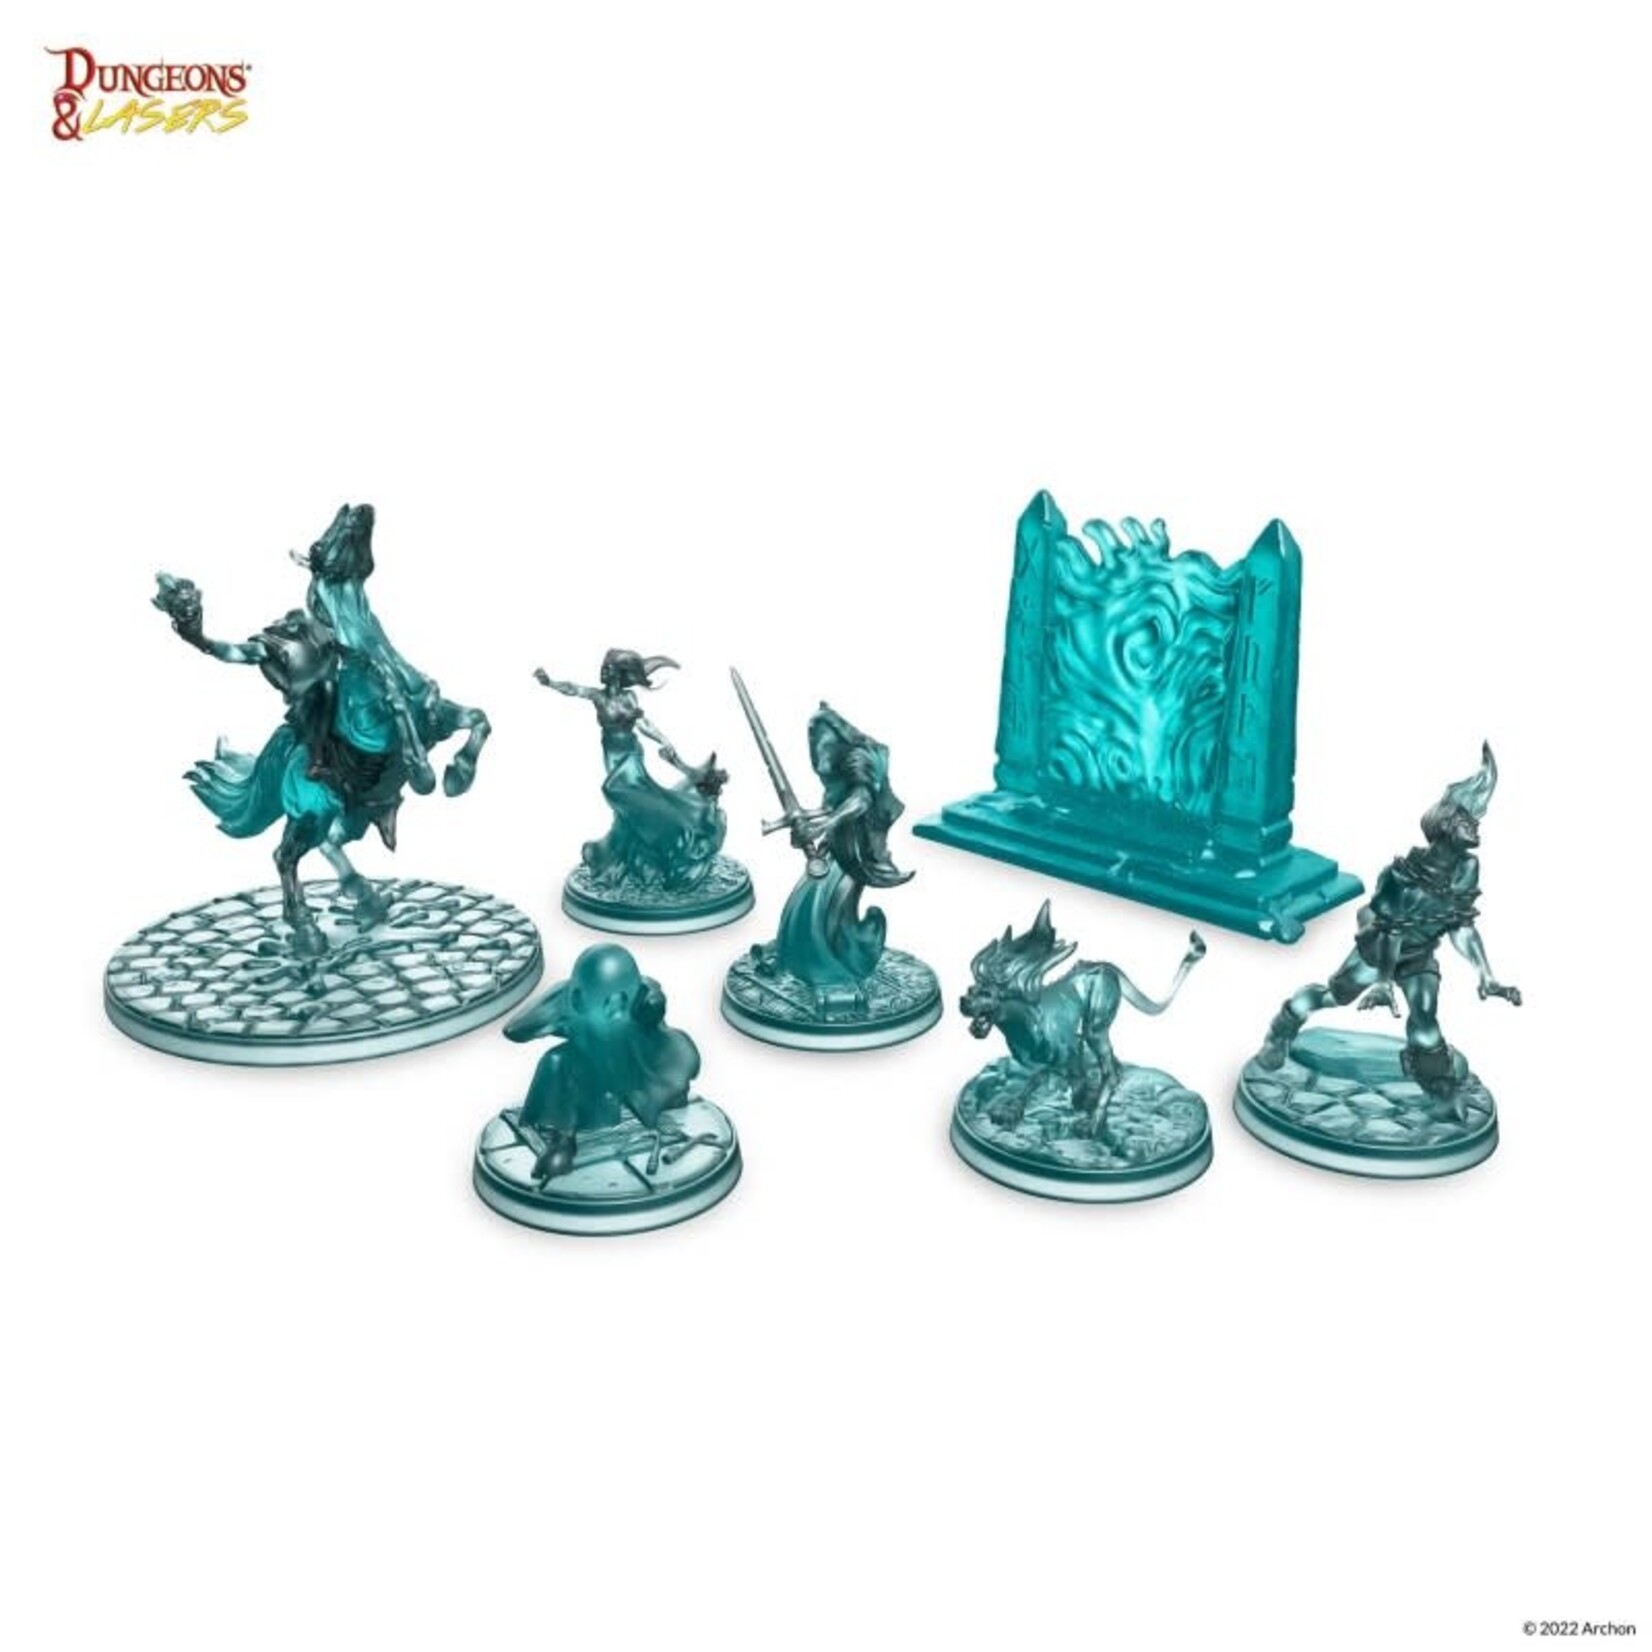 Archon Studio Dungeons & Lasers Ghosts Mini Pack Clear Plastic